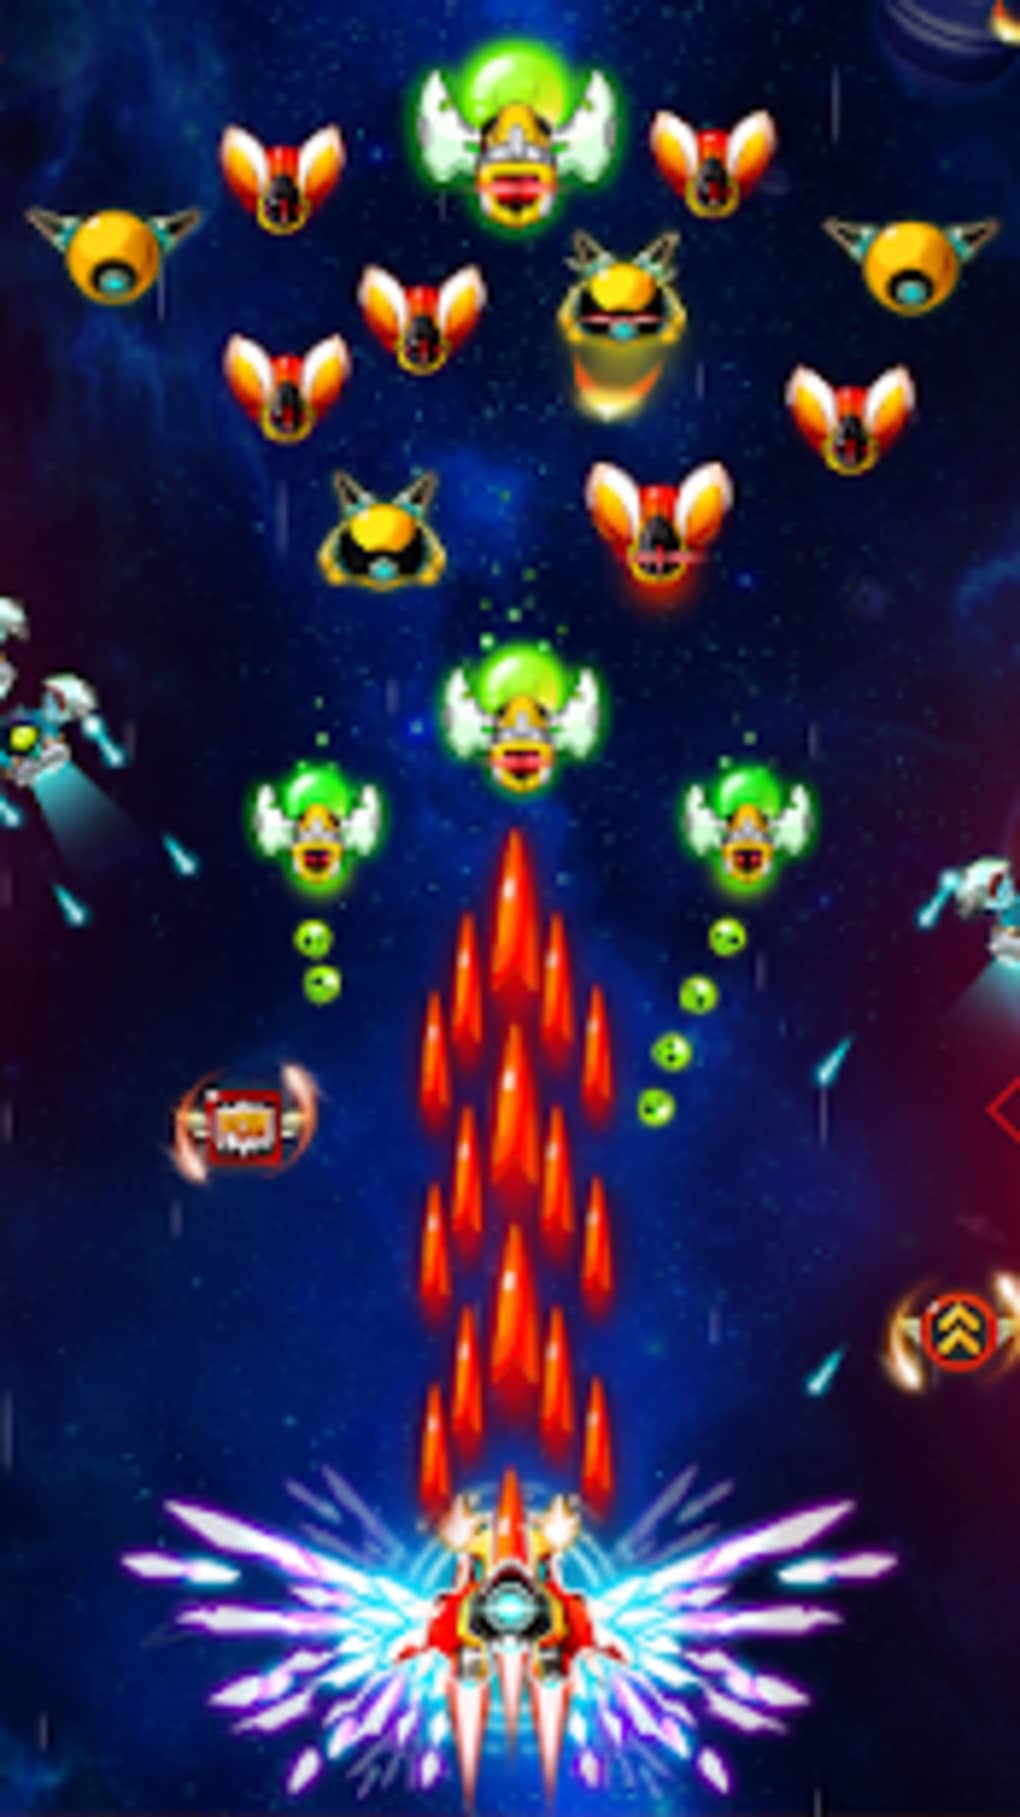 Space Hunter Arcade Shooting Games for Android